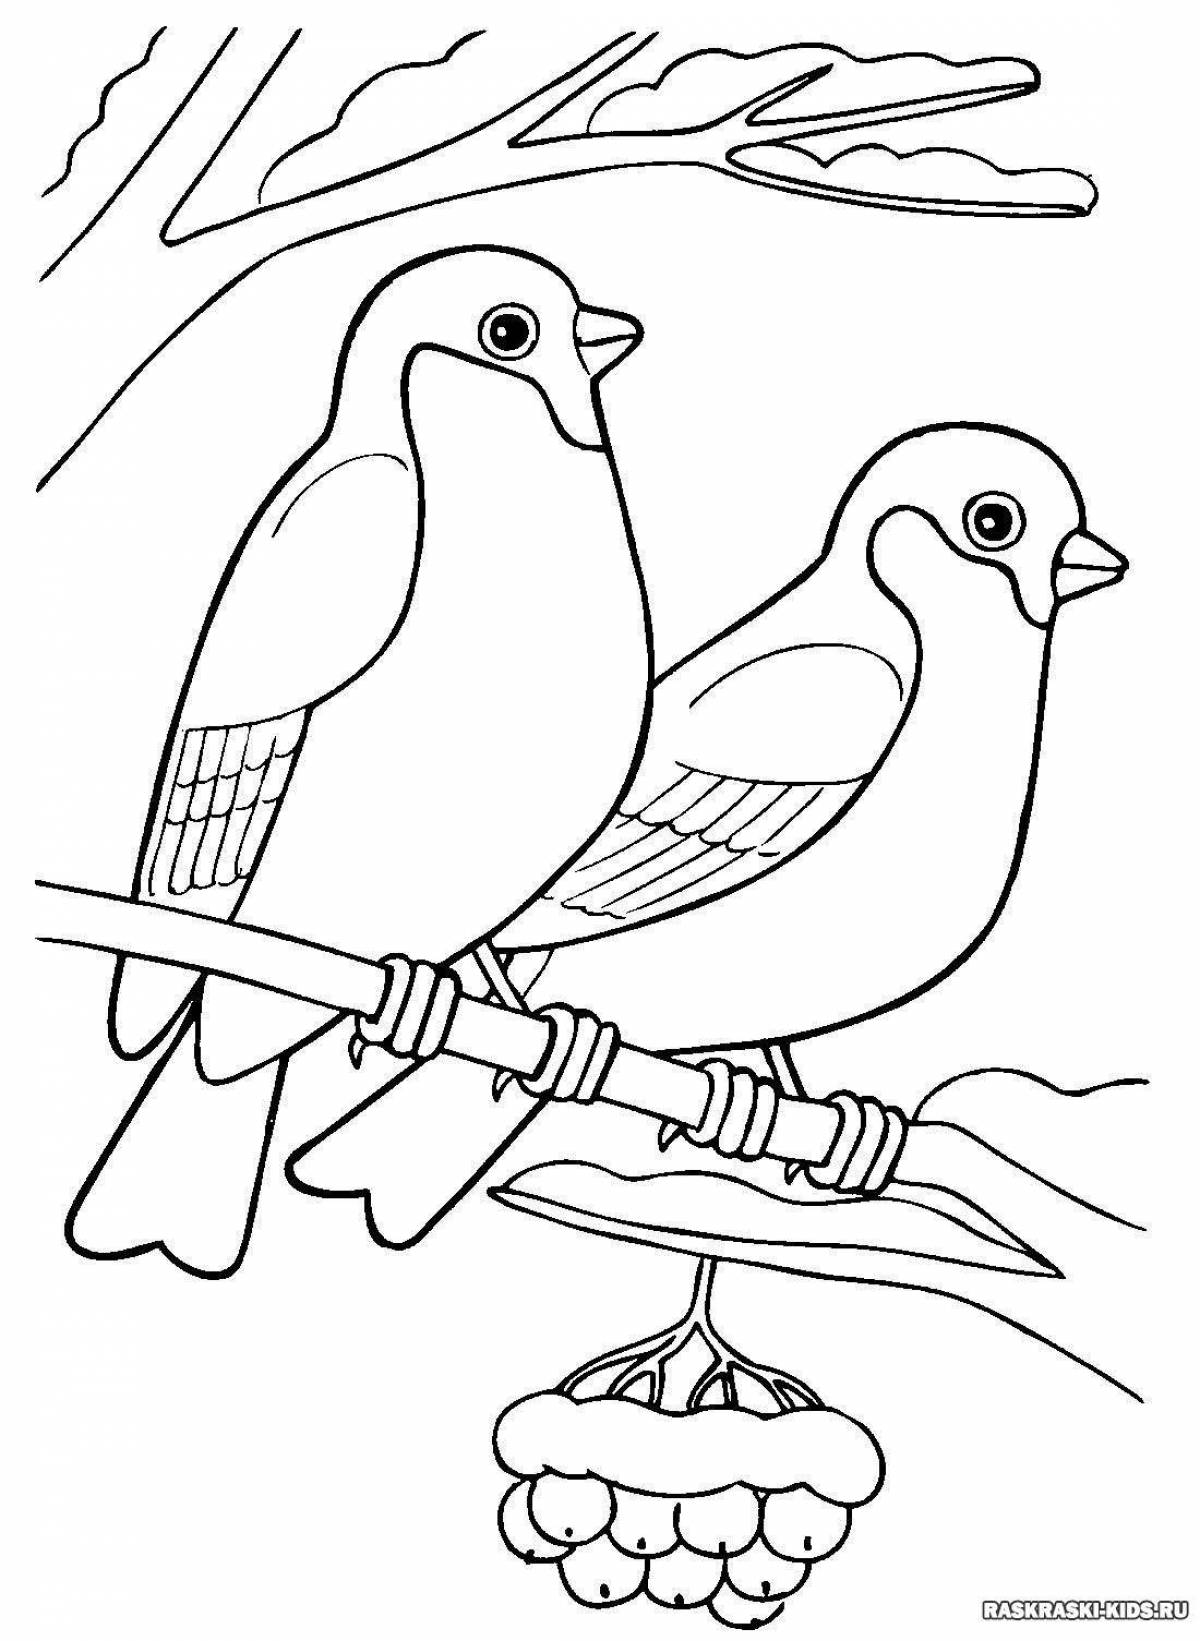 Amazing winter bird coloring page